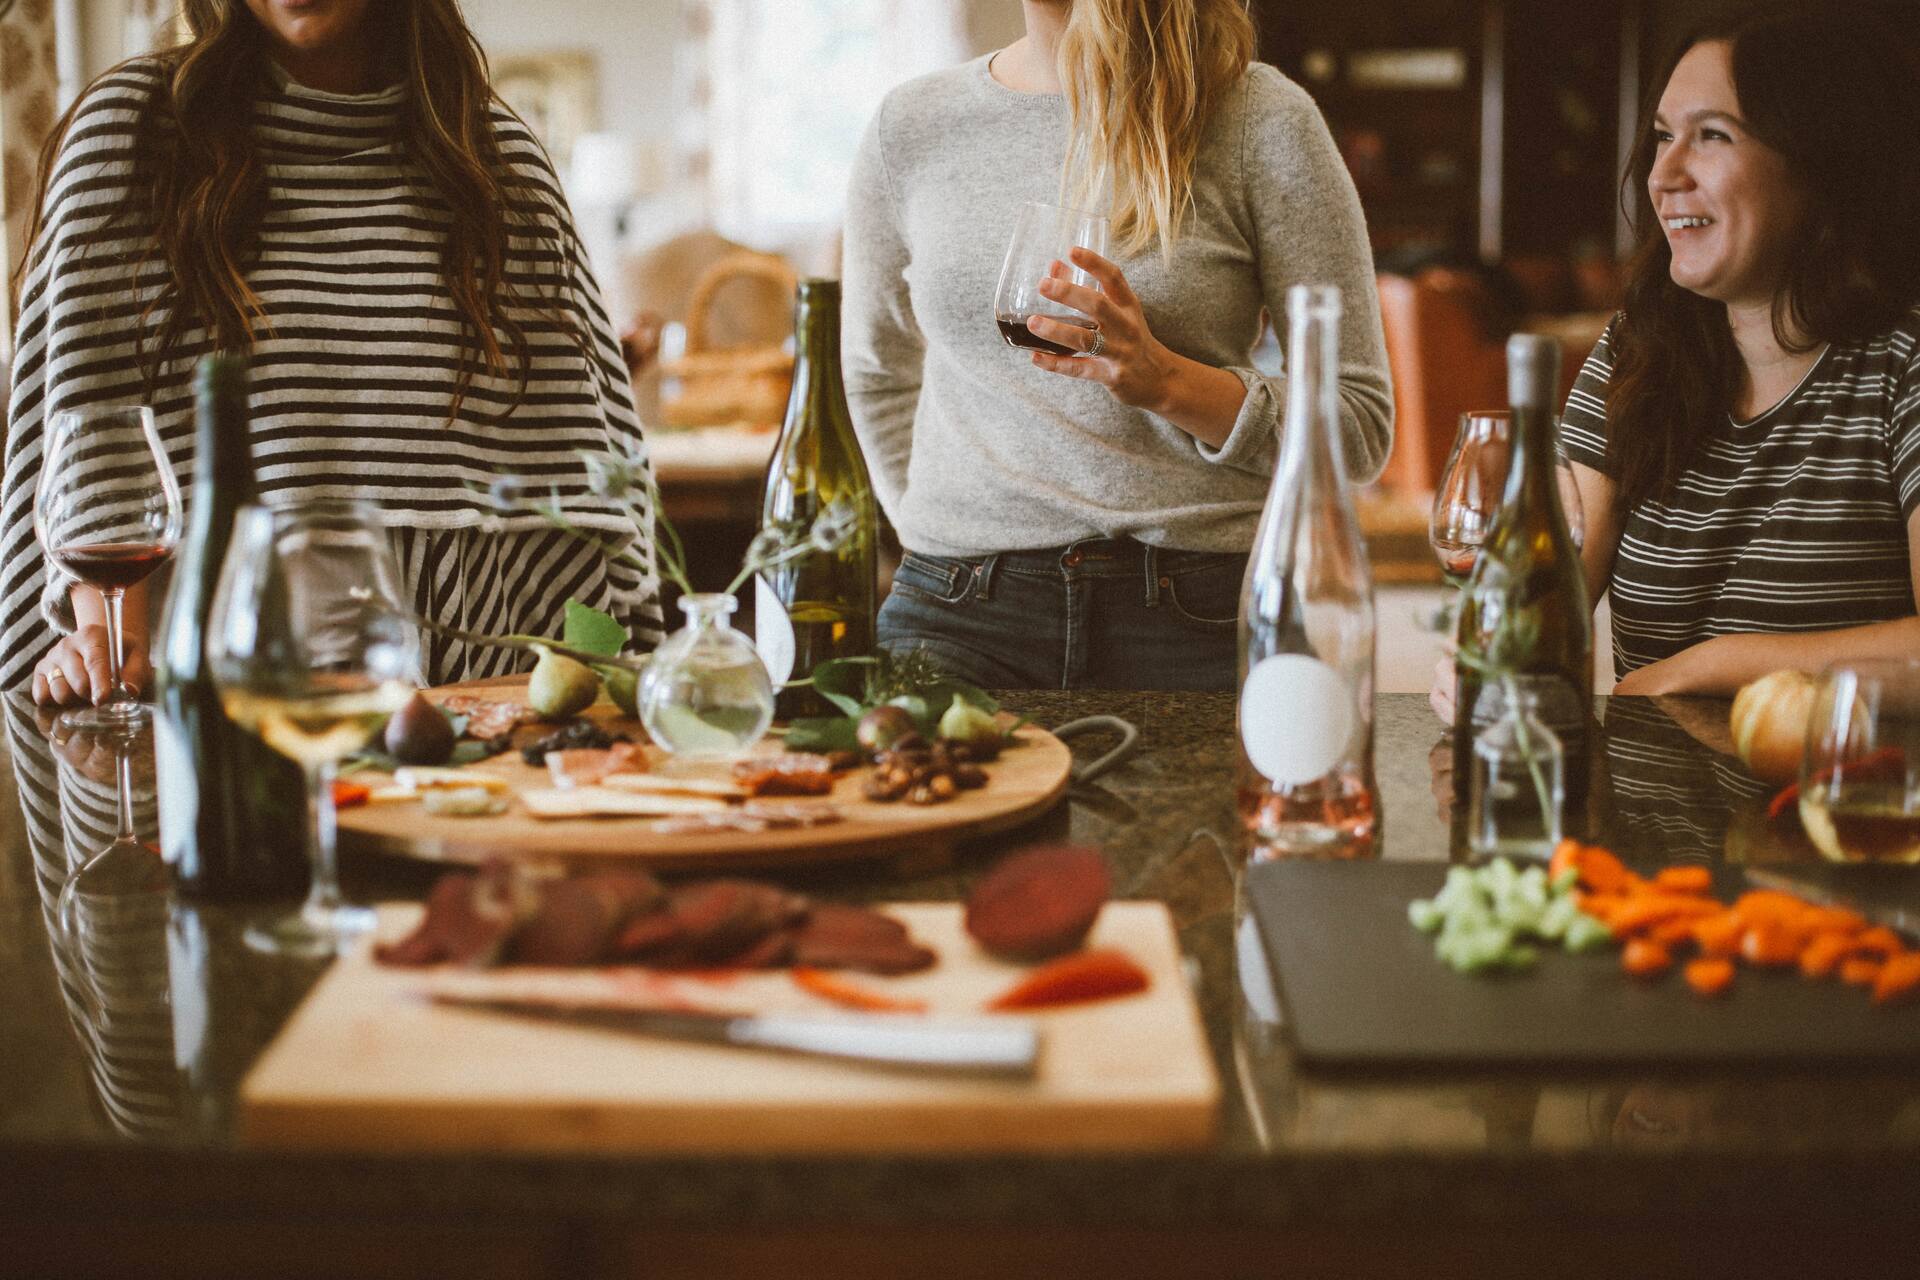 People eating and drinking wine